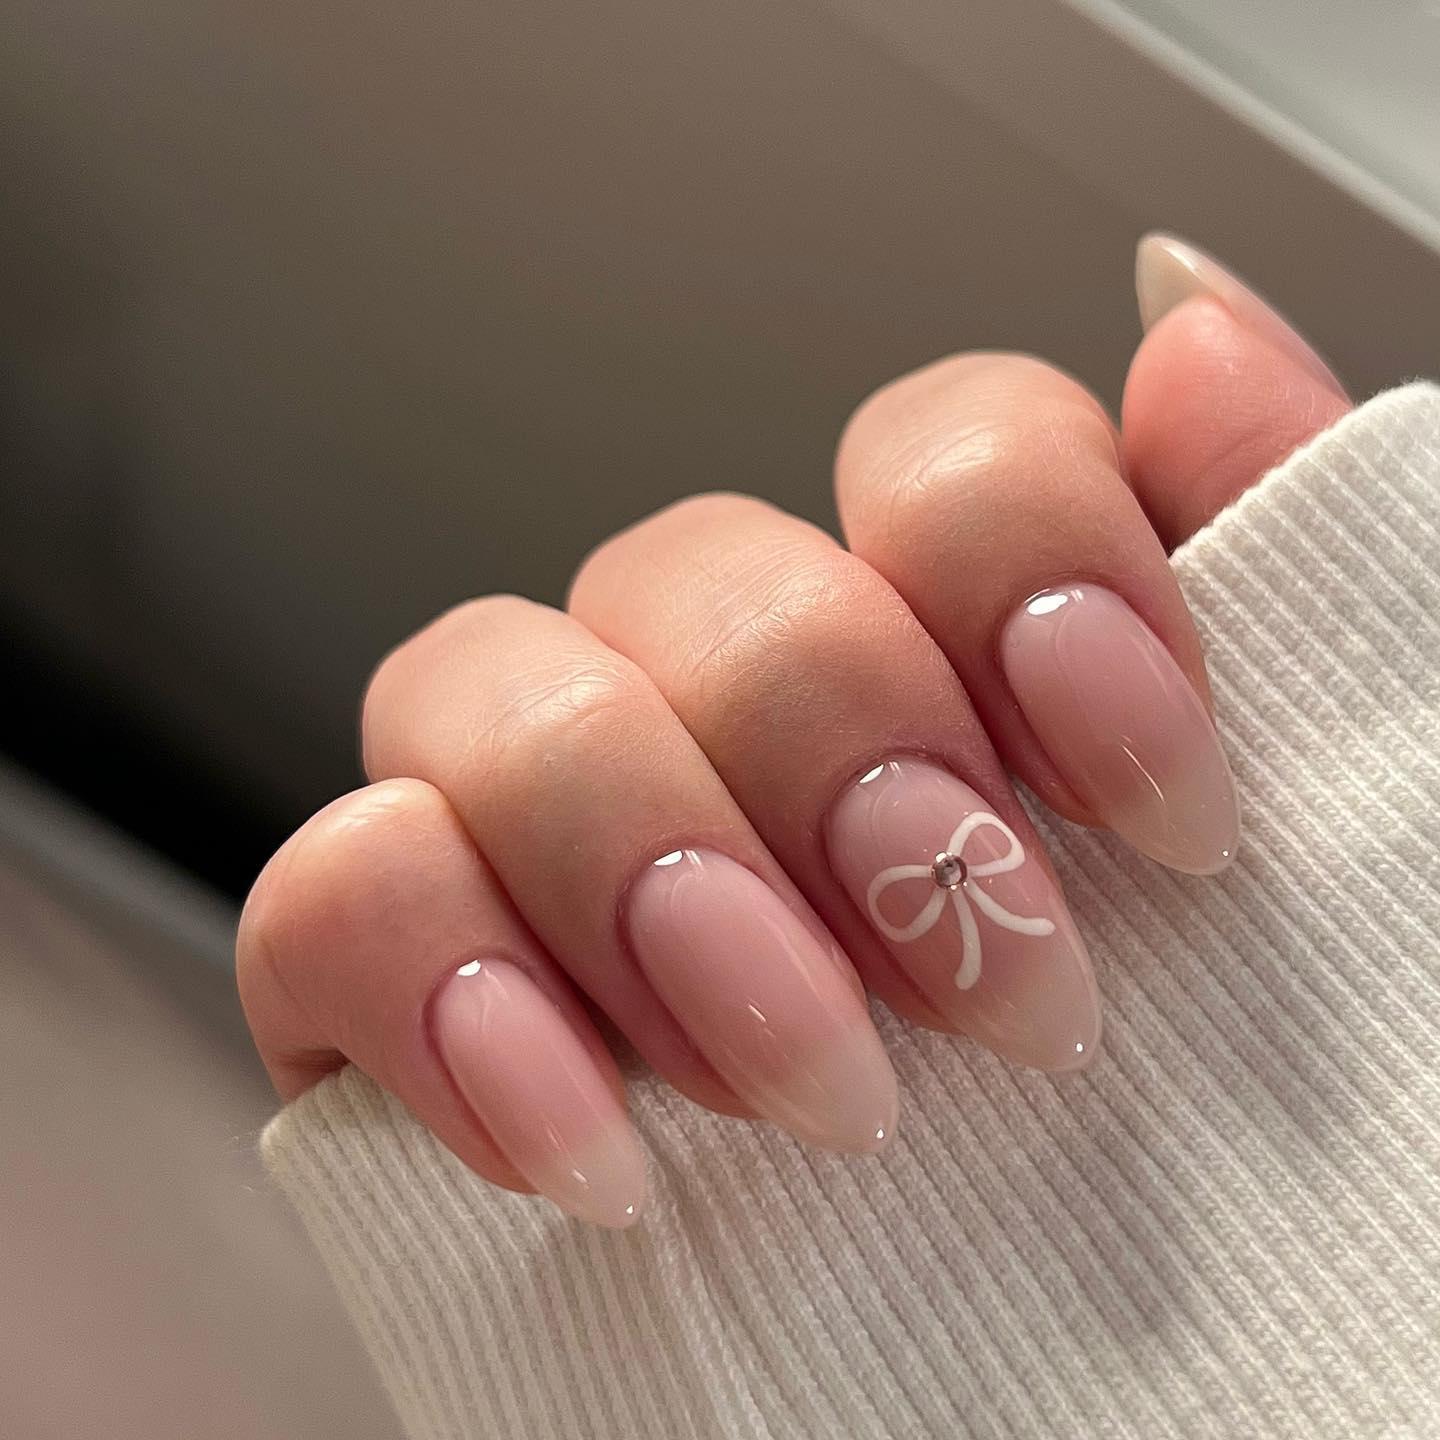 A variation of the usual nude in a new trendy design